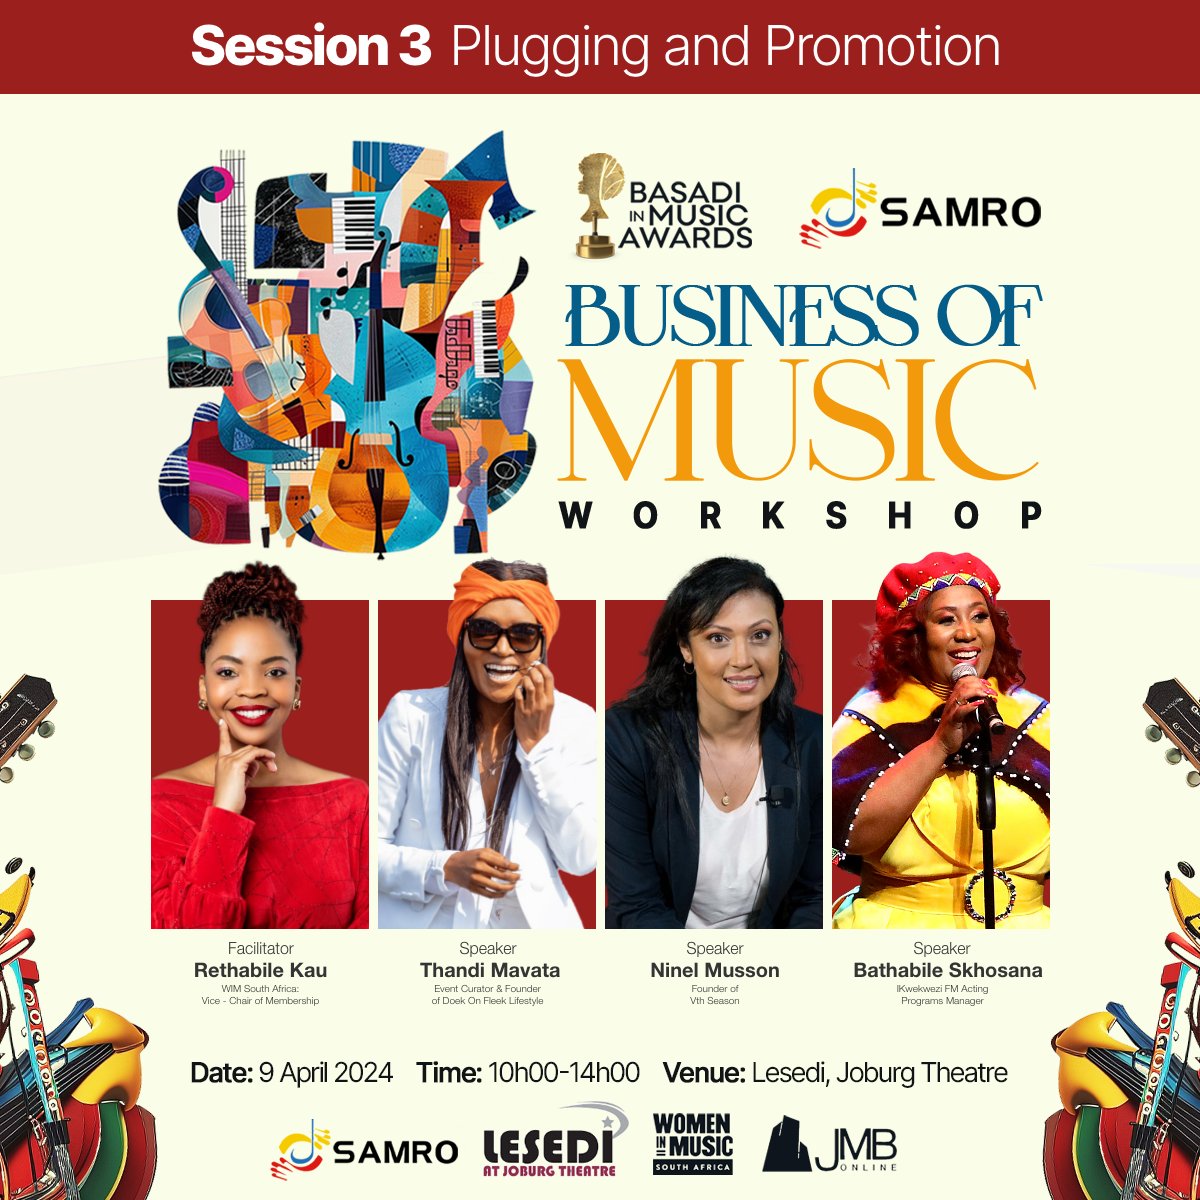 EVENT REMINDER: SAMRO has partnered with Basadi In Music Awards (BIMA) to host the third iteration of the Business of Music Workshops at Joburg Theatre on April 9th, 2024. This collaboration resulted from SAMRO's 2021 research on Women's Rights and Representation in South…